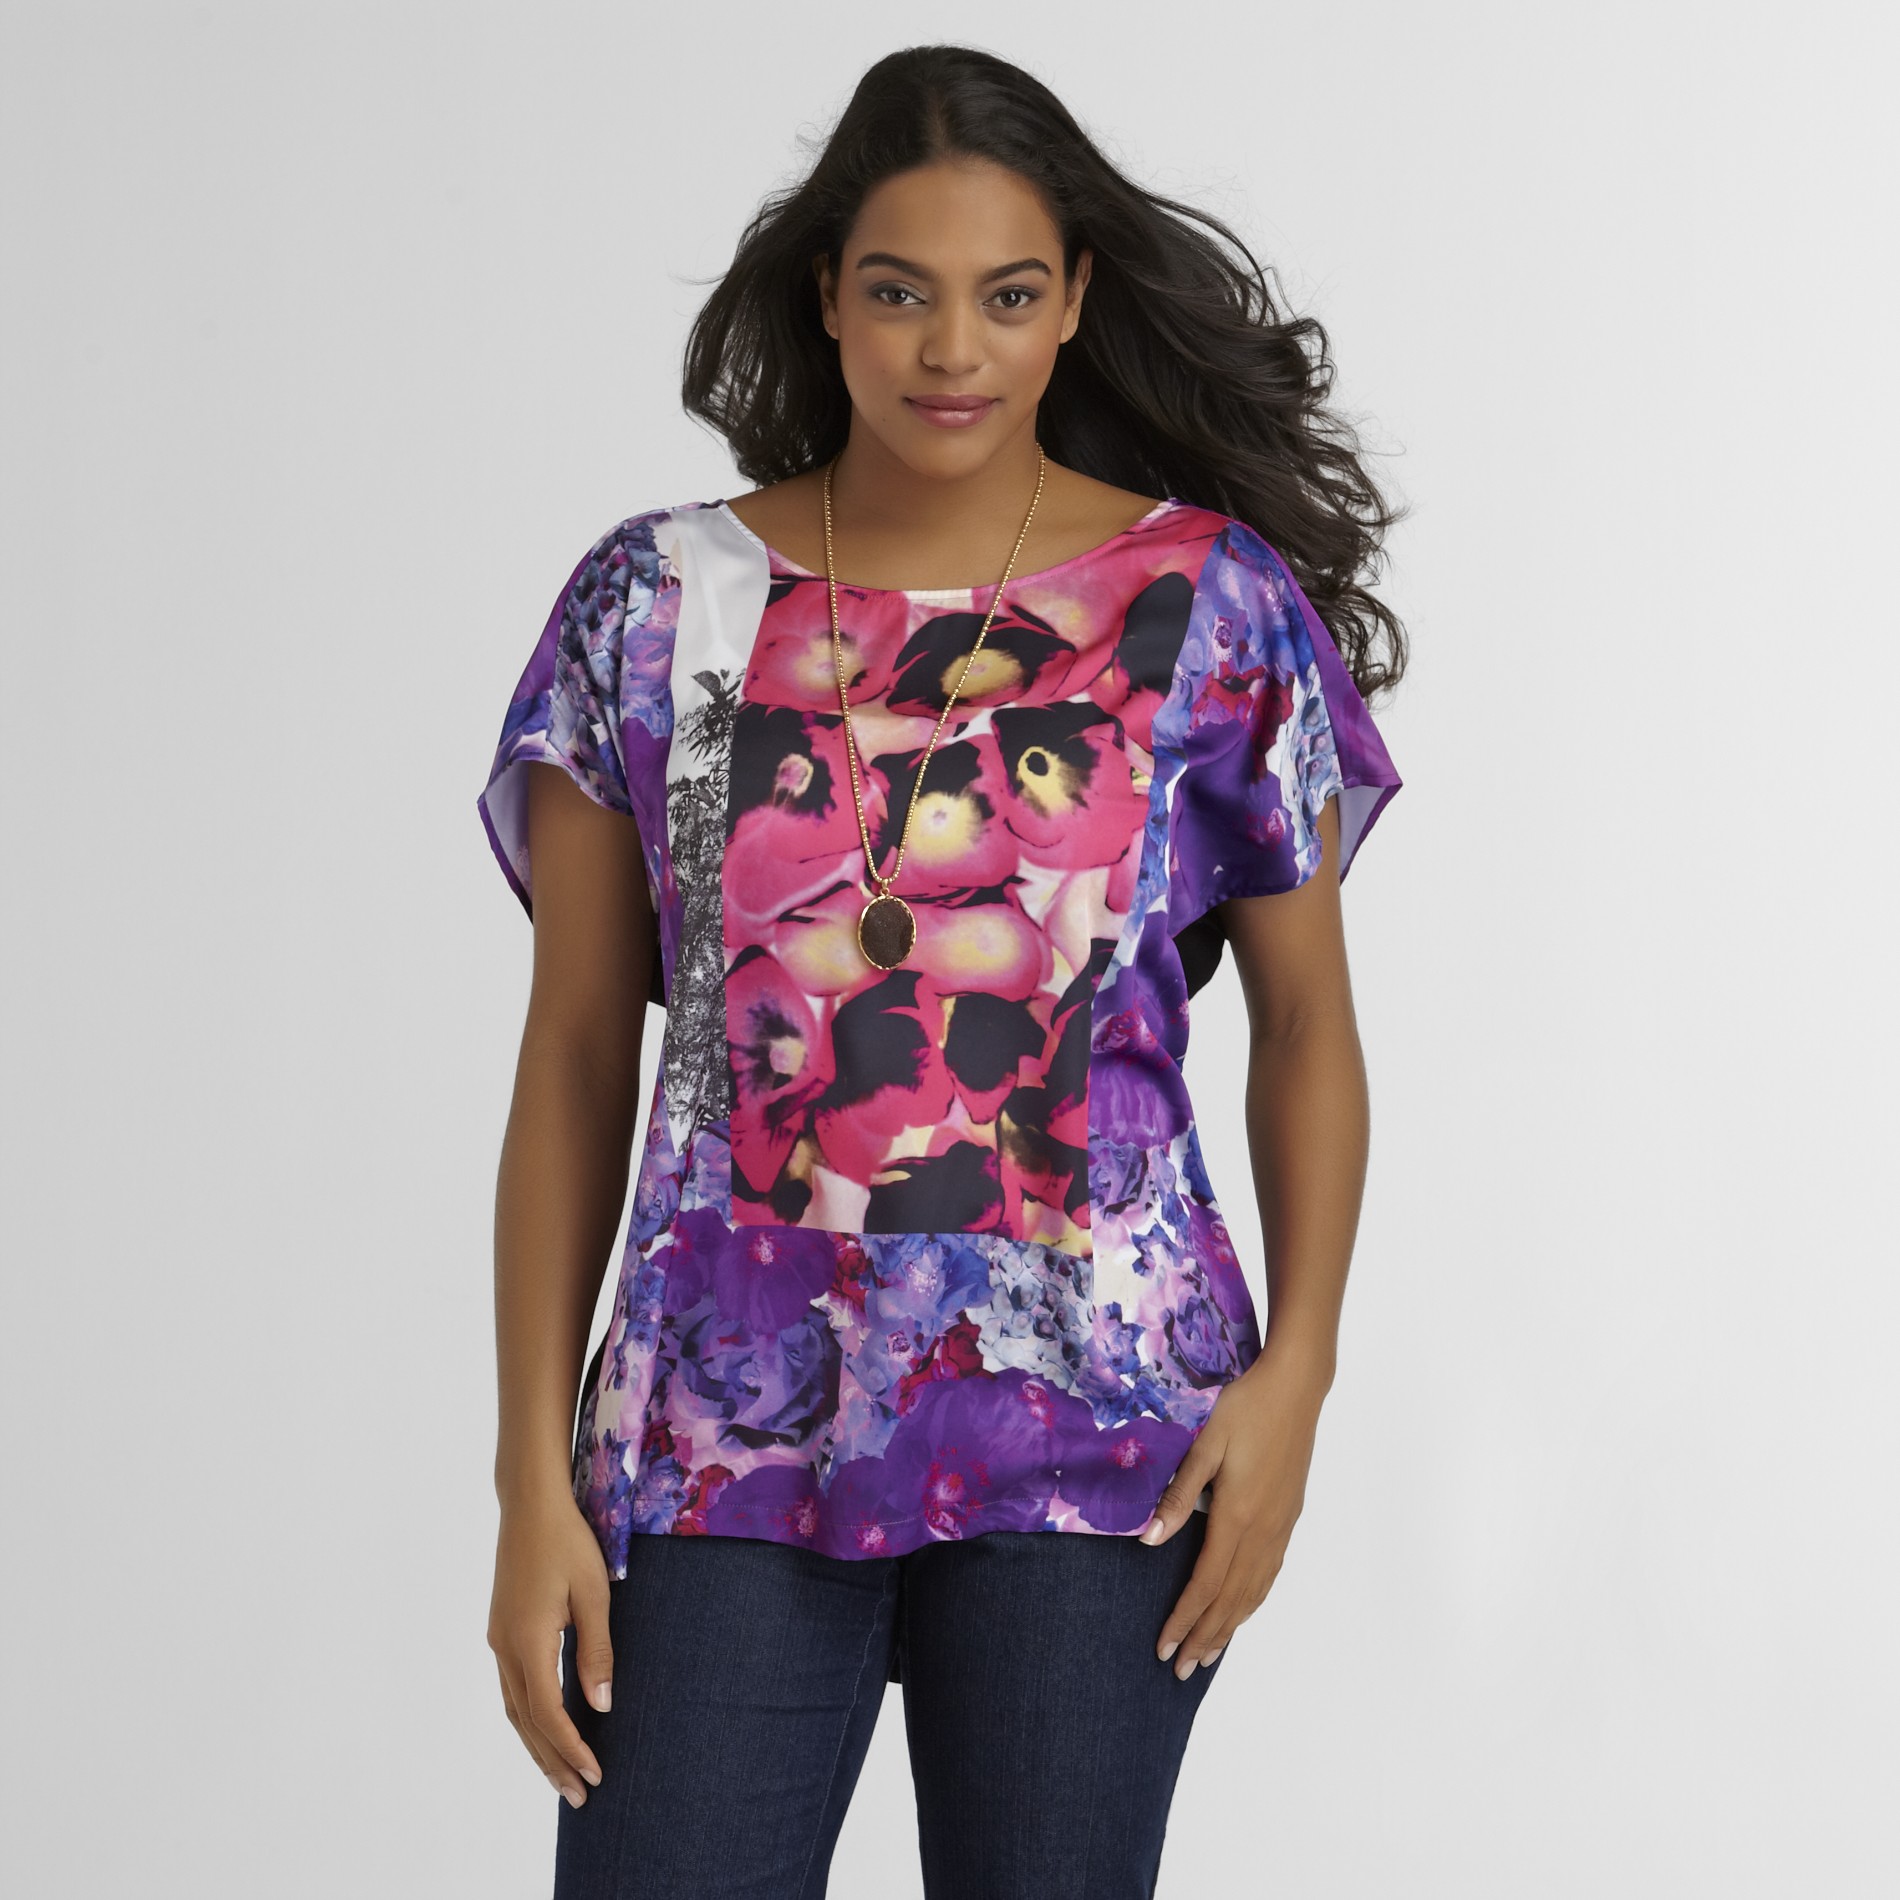 Love Your Style, Love Your Size Women's Plus Top - Flowers